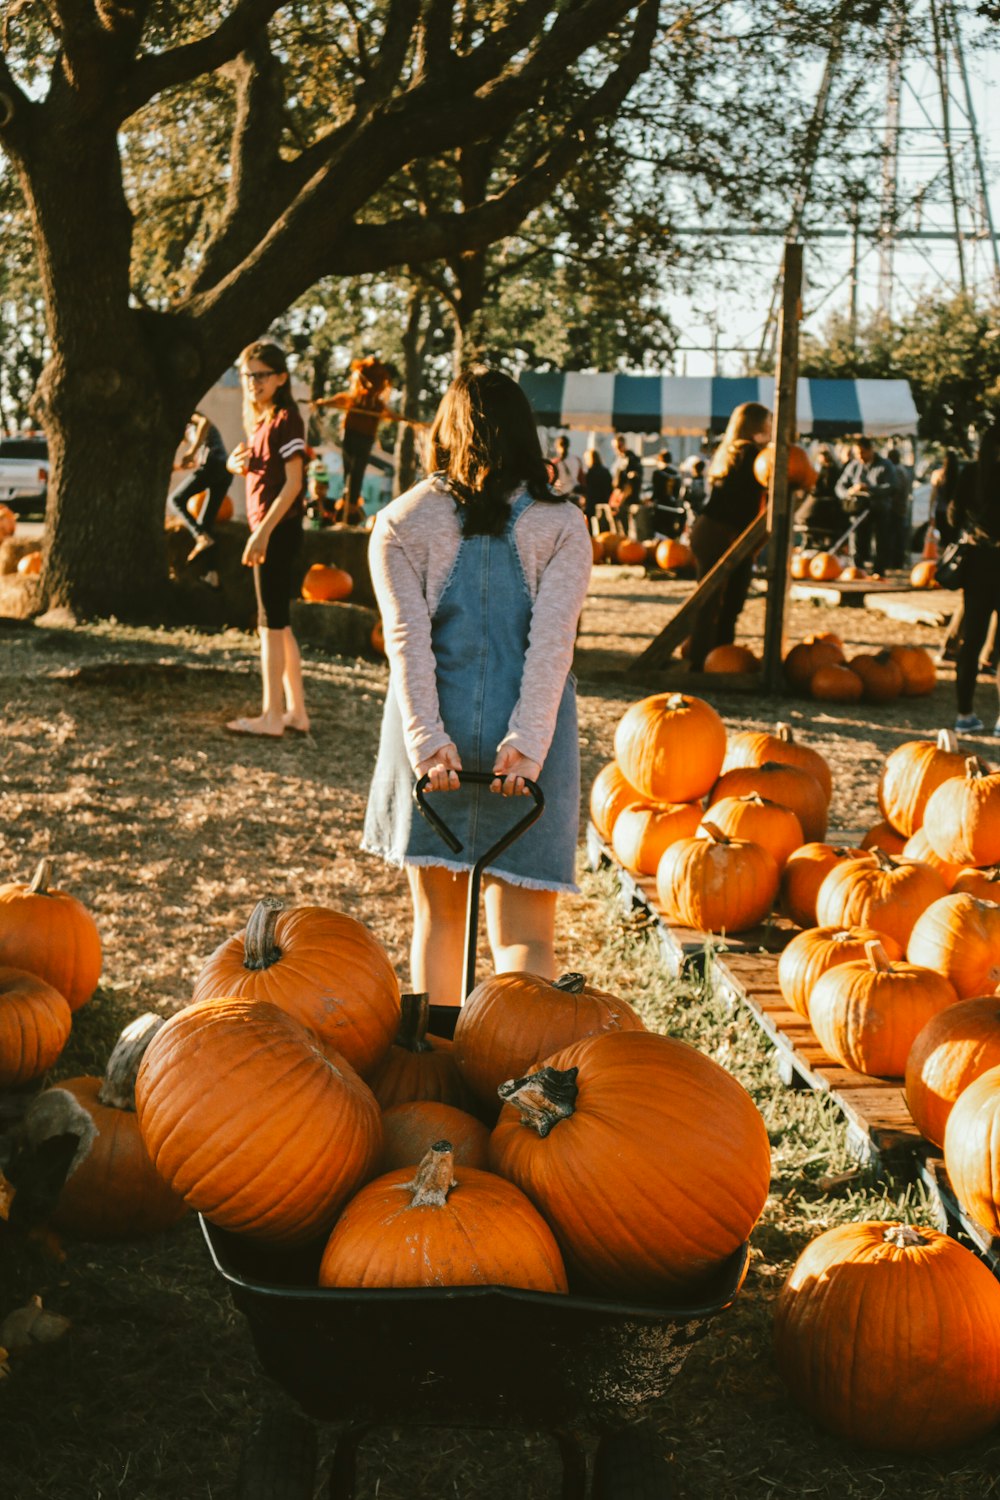 woman pulling wagon with pumpkins